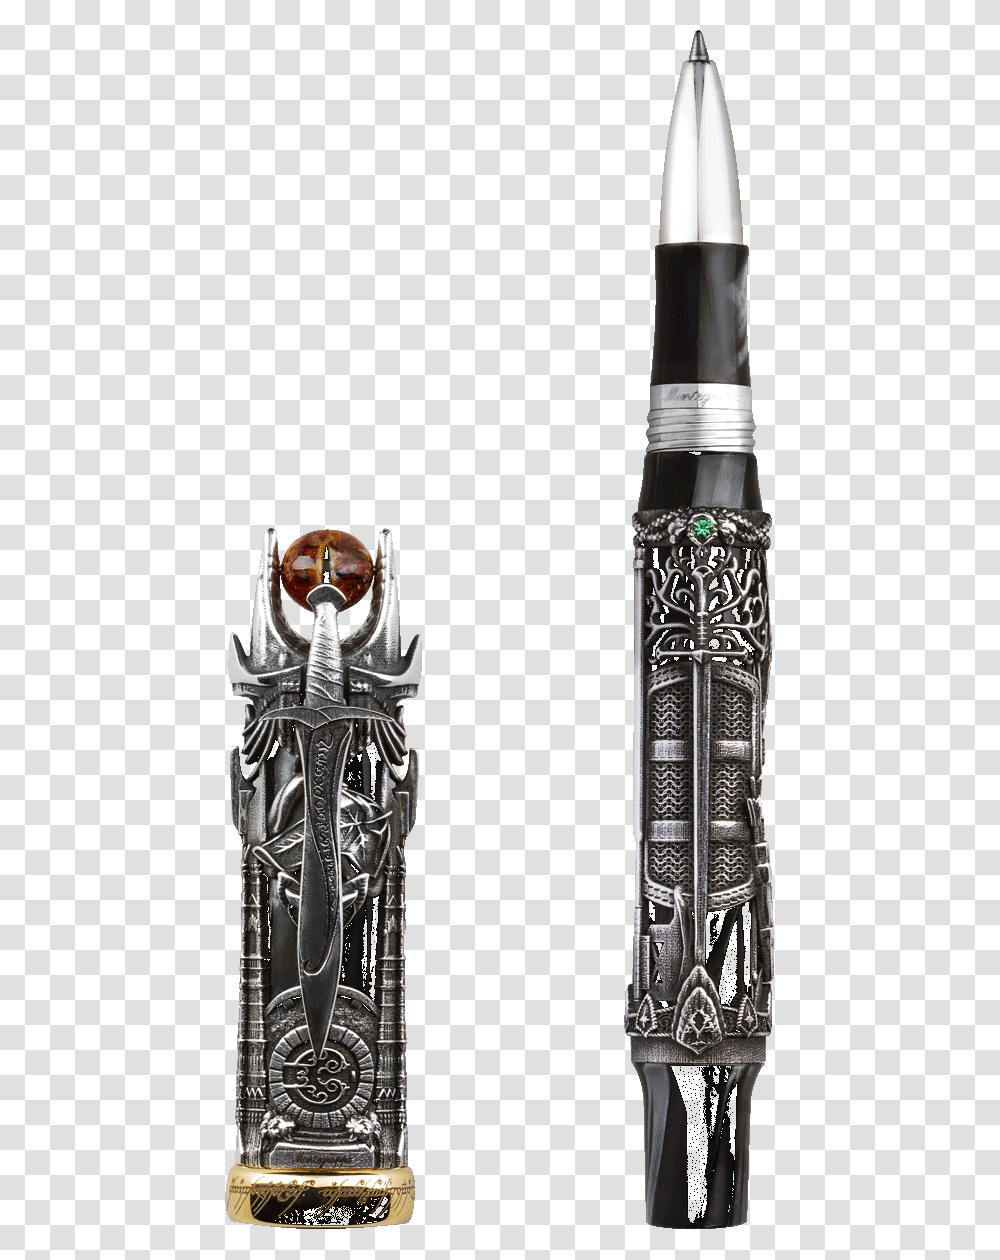 Montegrappa Lord Of The Rings Fountain Pen, Architecture, Building, Rocket, Vehicle Transparent Png